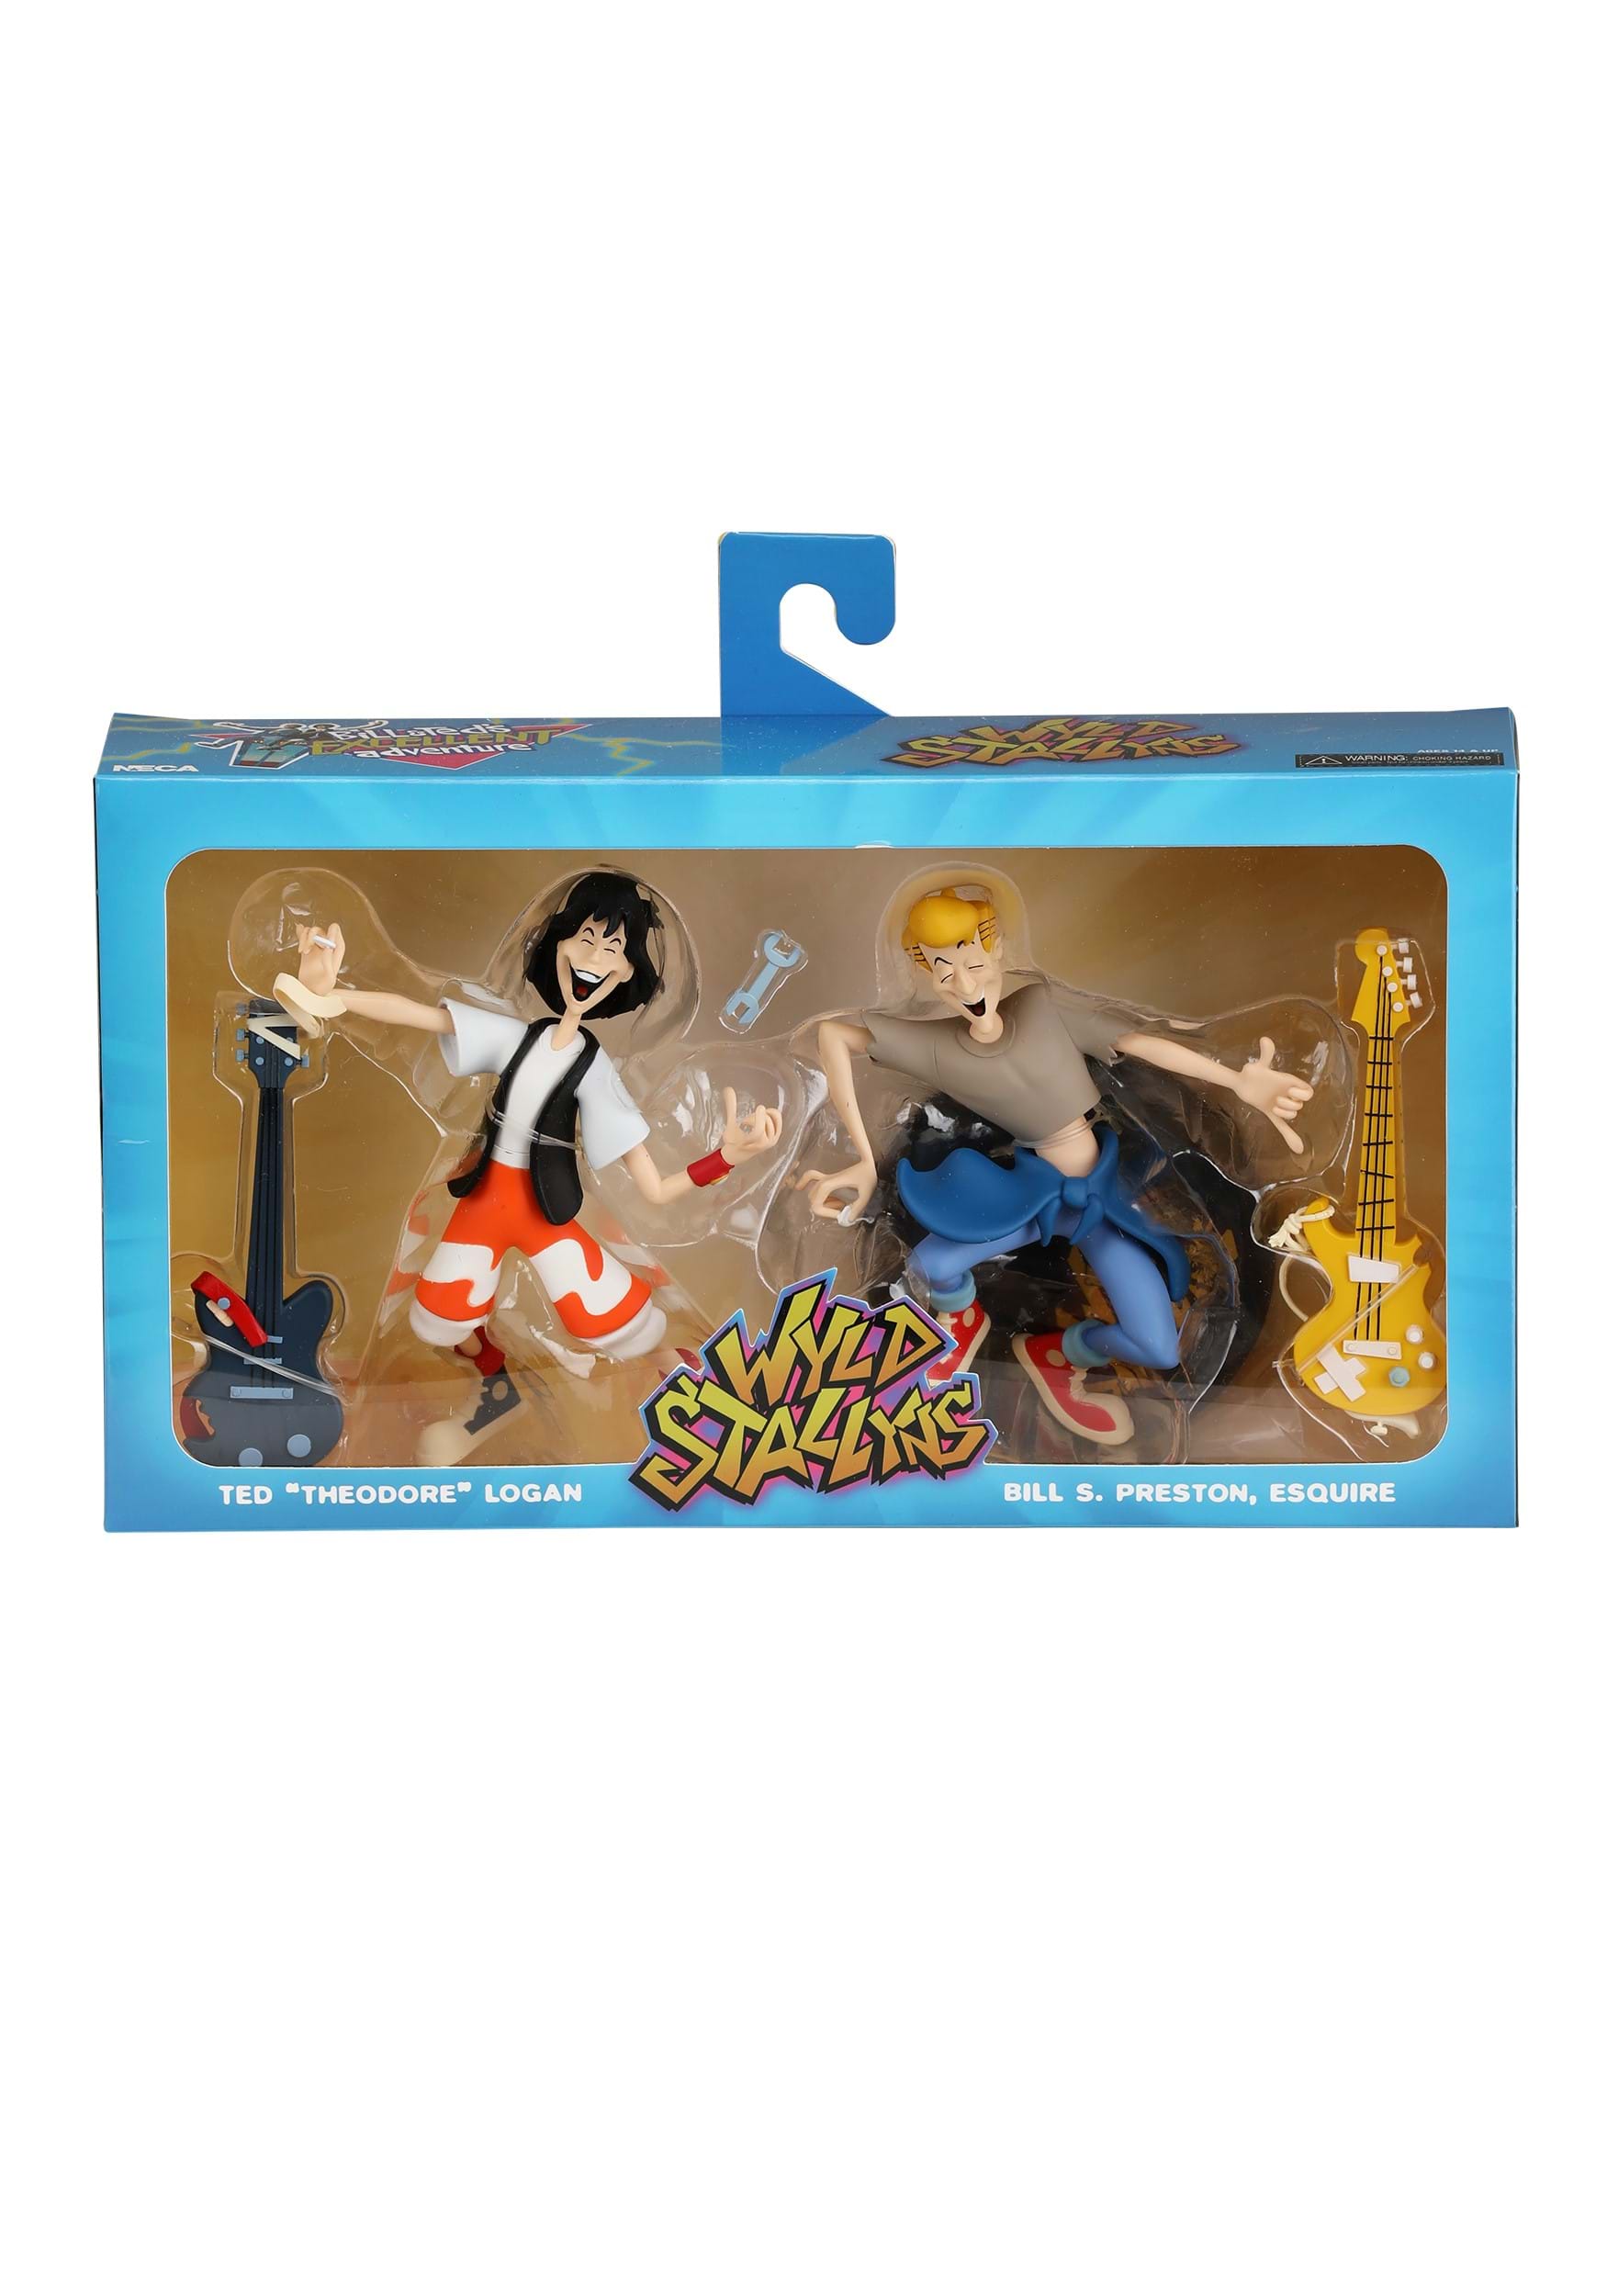 Neca Bill and Ted's Excellent Adventure Toony Classics 2-pack 6" scale set 